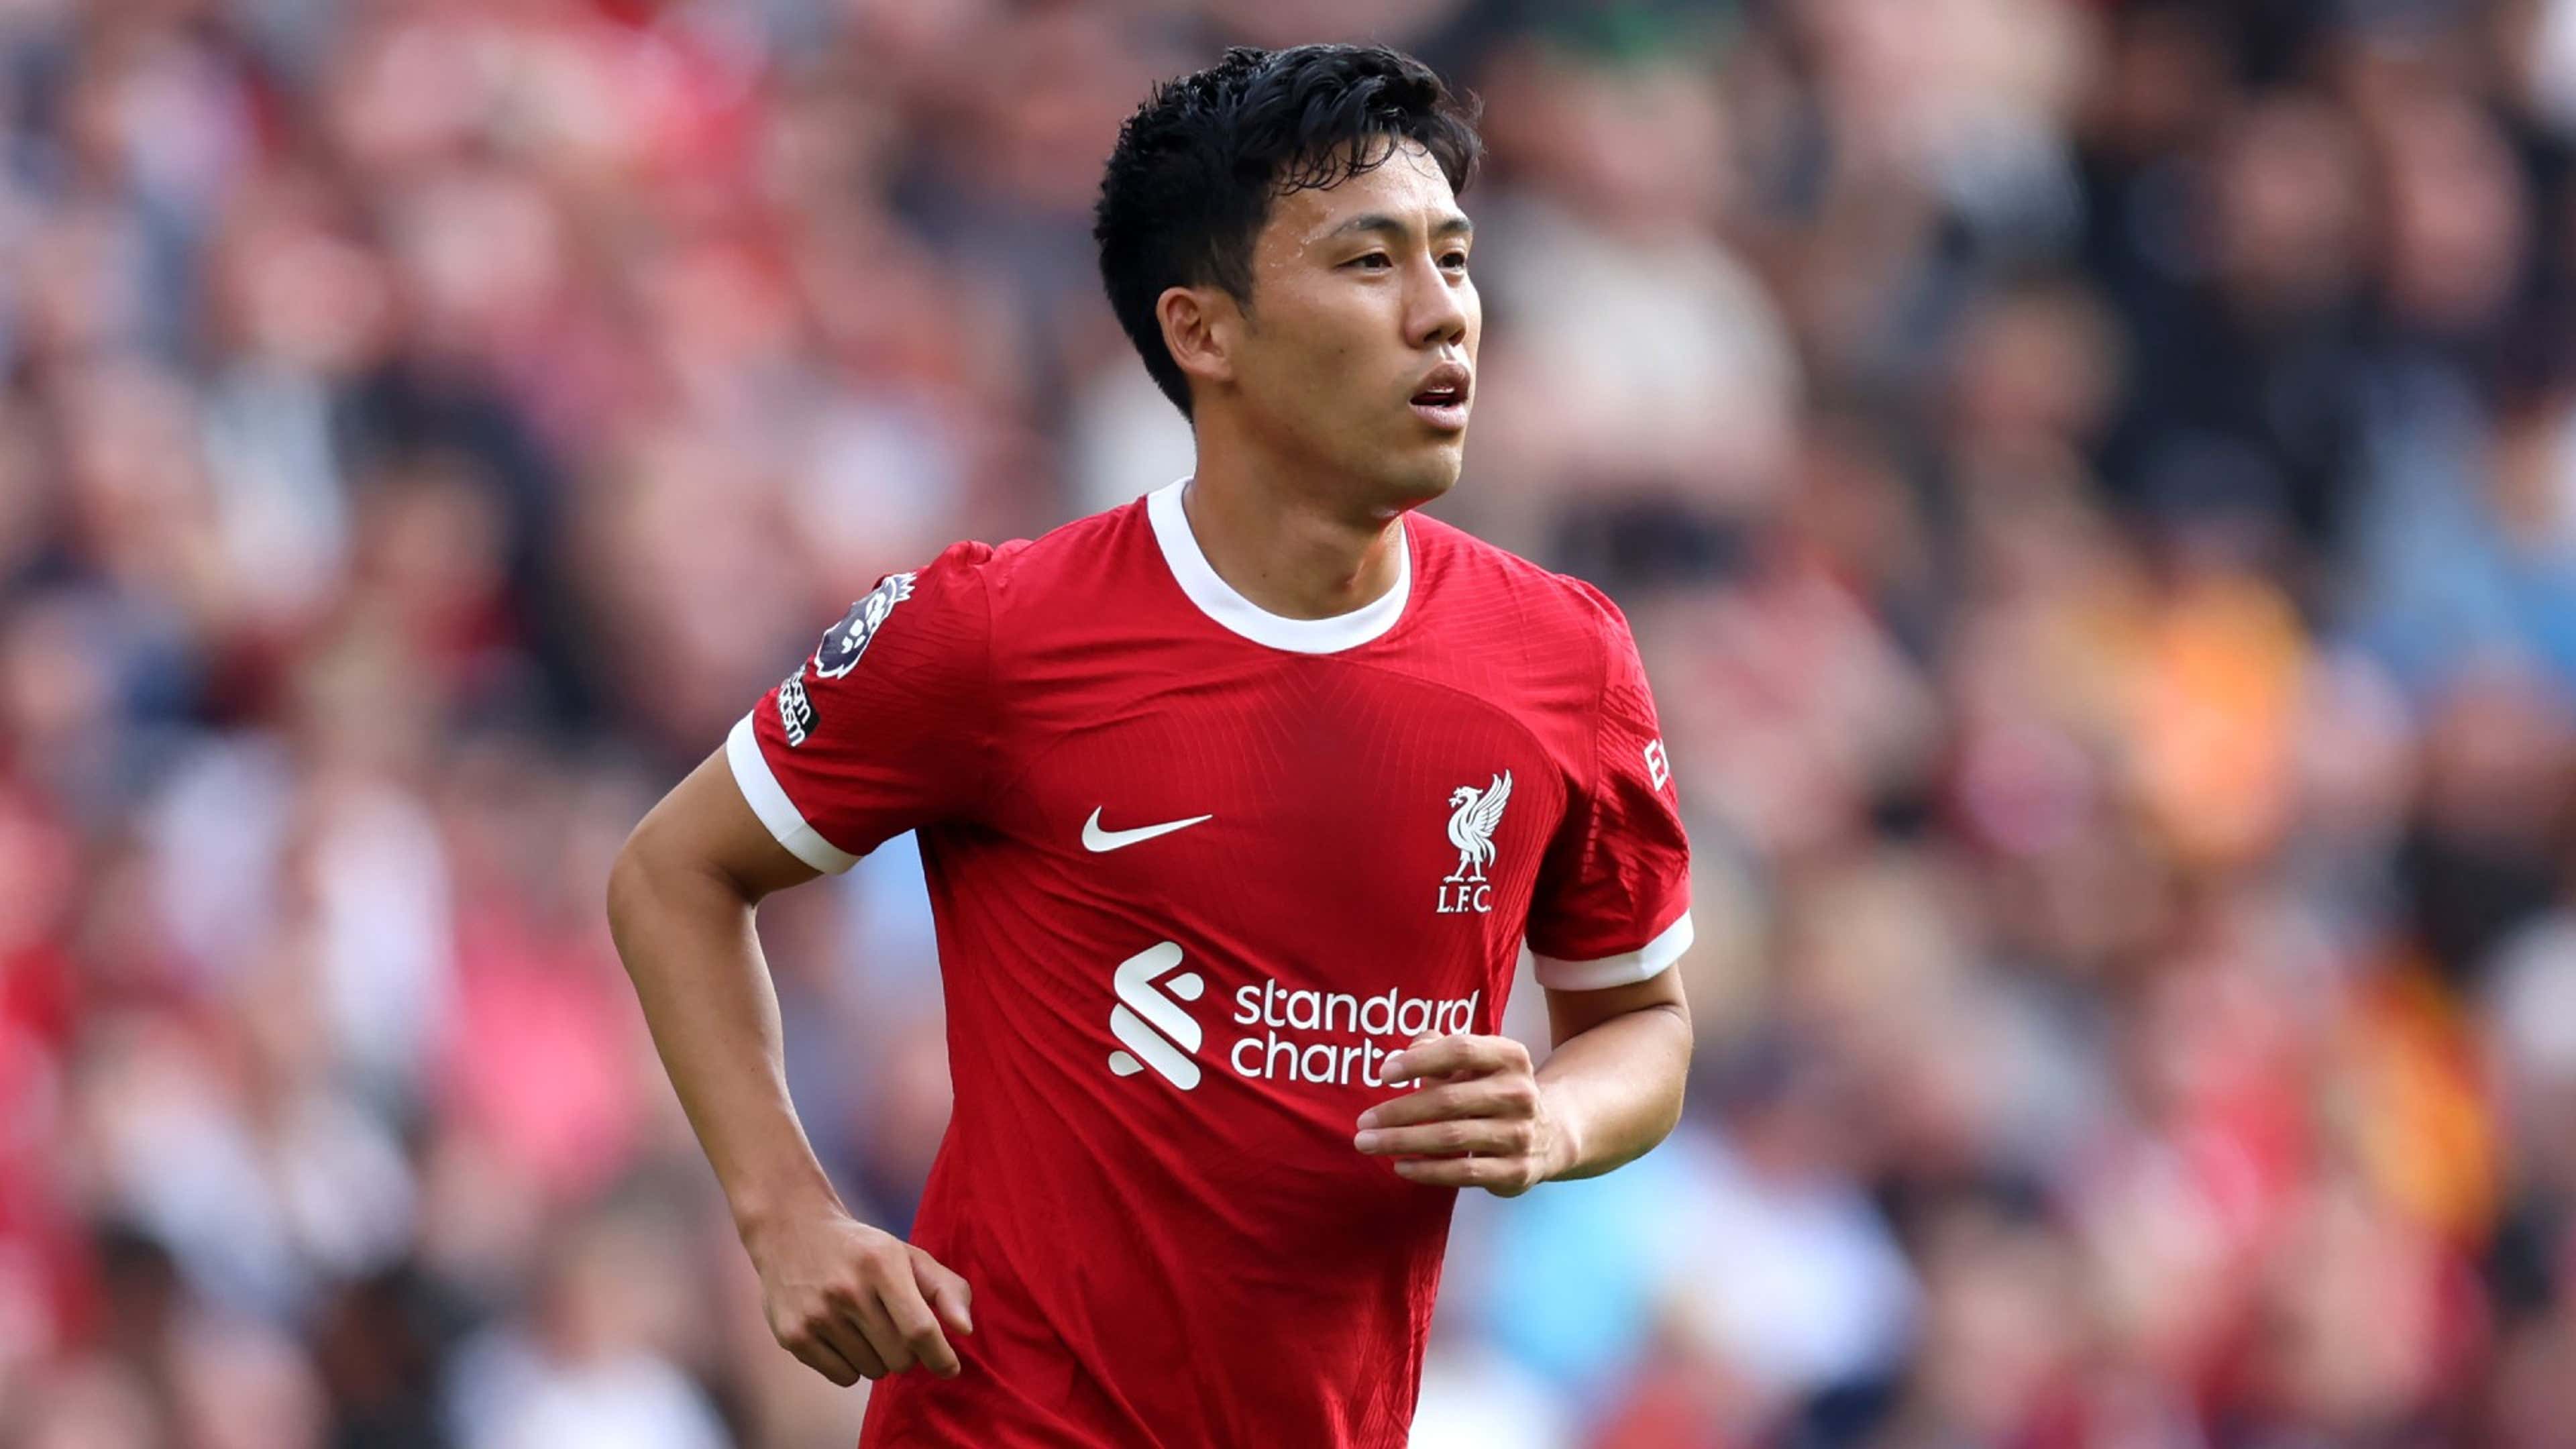 It was crazy!' - Wataru Endo reflects on Liverpool debut after whirlwind  transfer from Stuttgart | Goal.com Nigeria